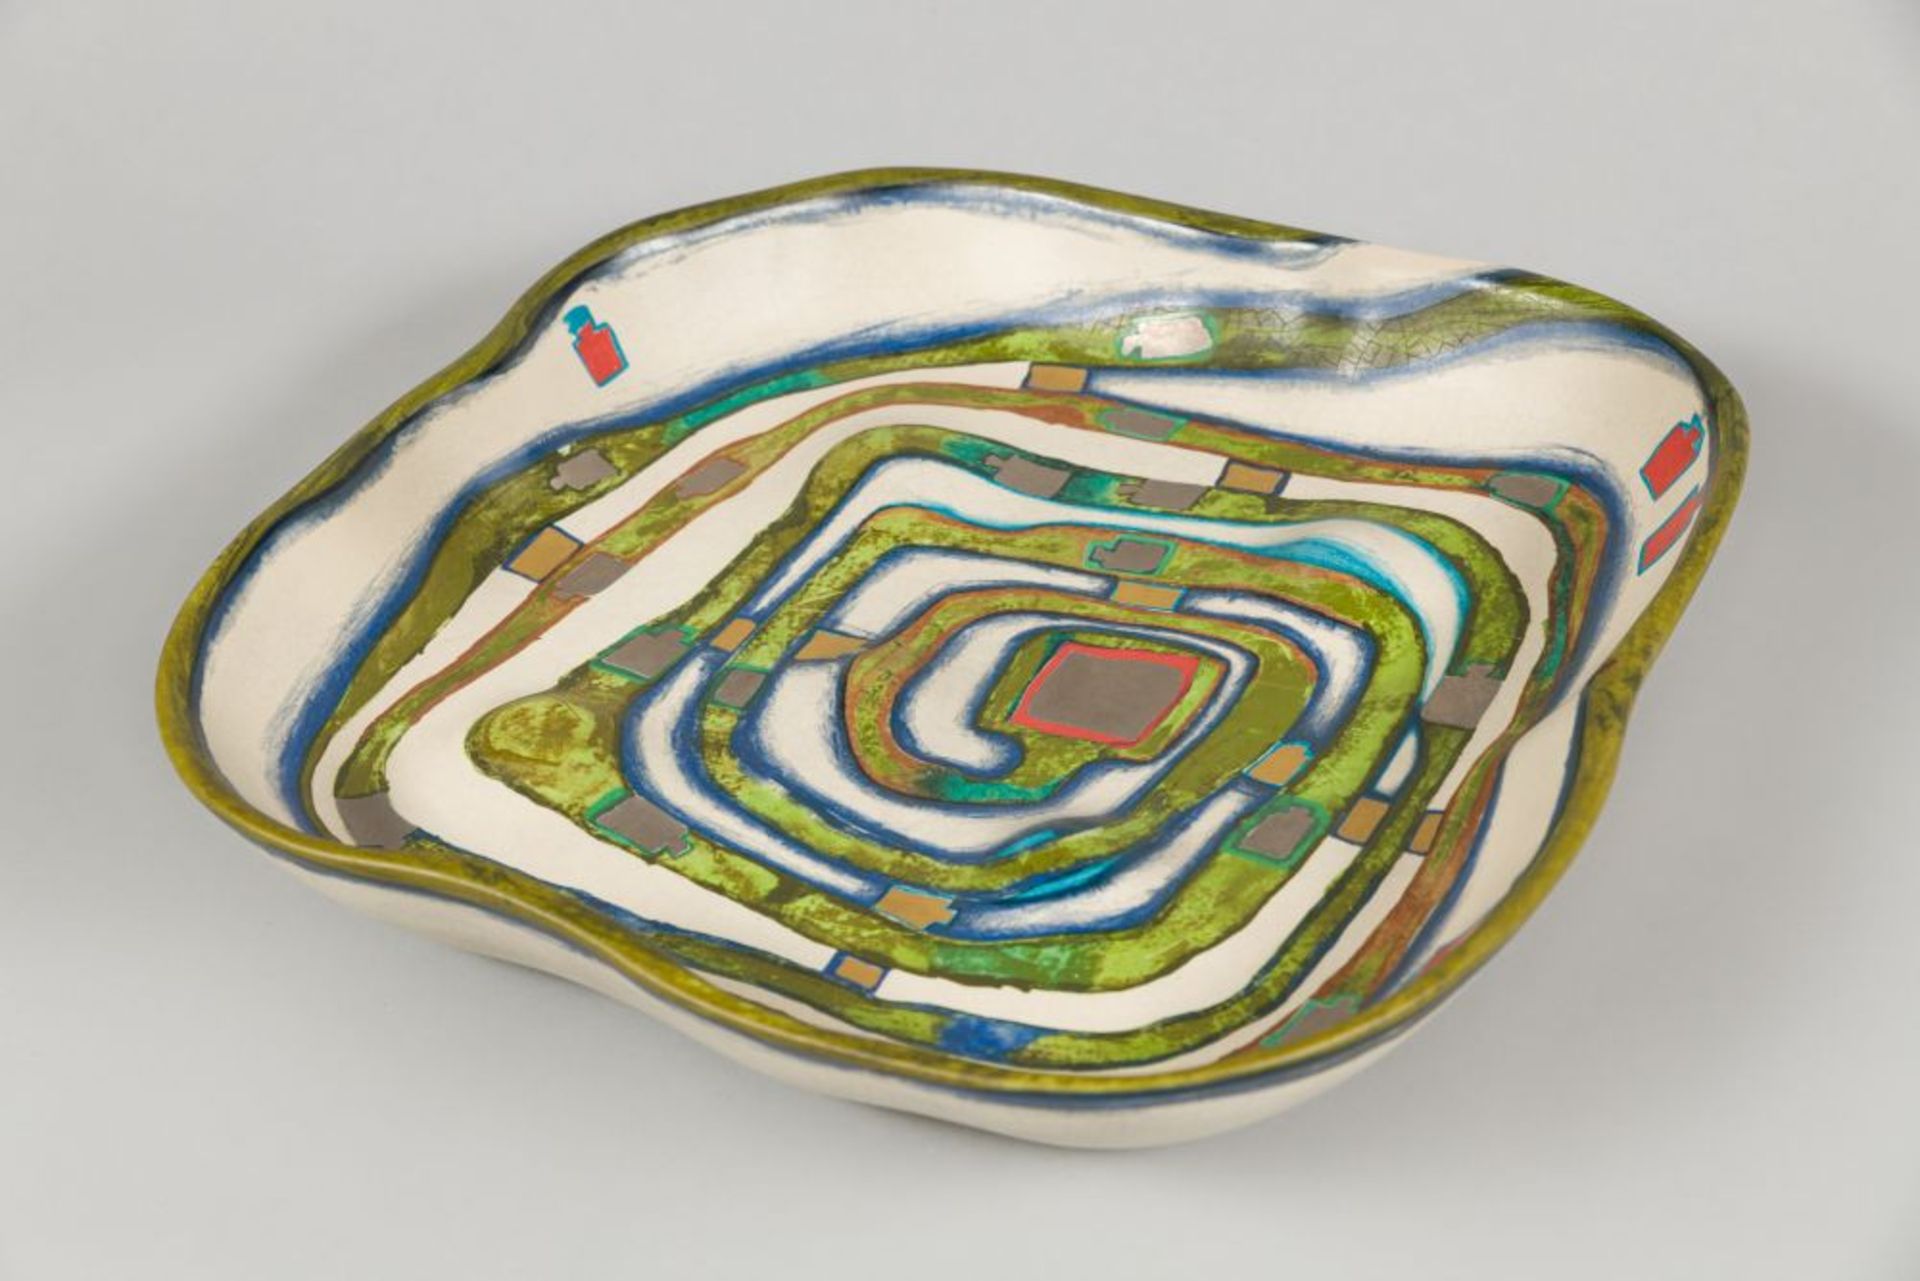 Spiralental, 1983 Ceramics Signed, dated, titled and numbered on the bottom: 634/2000 ca. 14,2 x